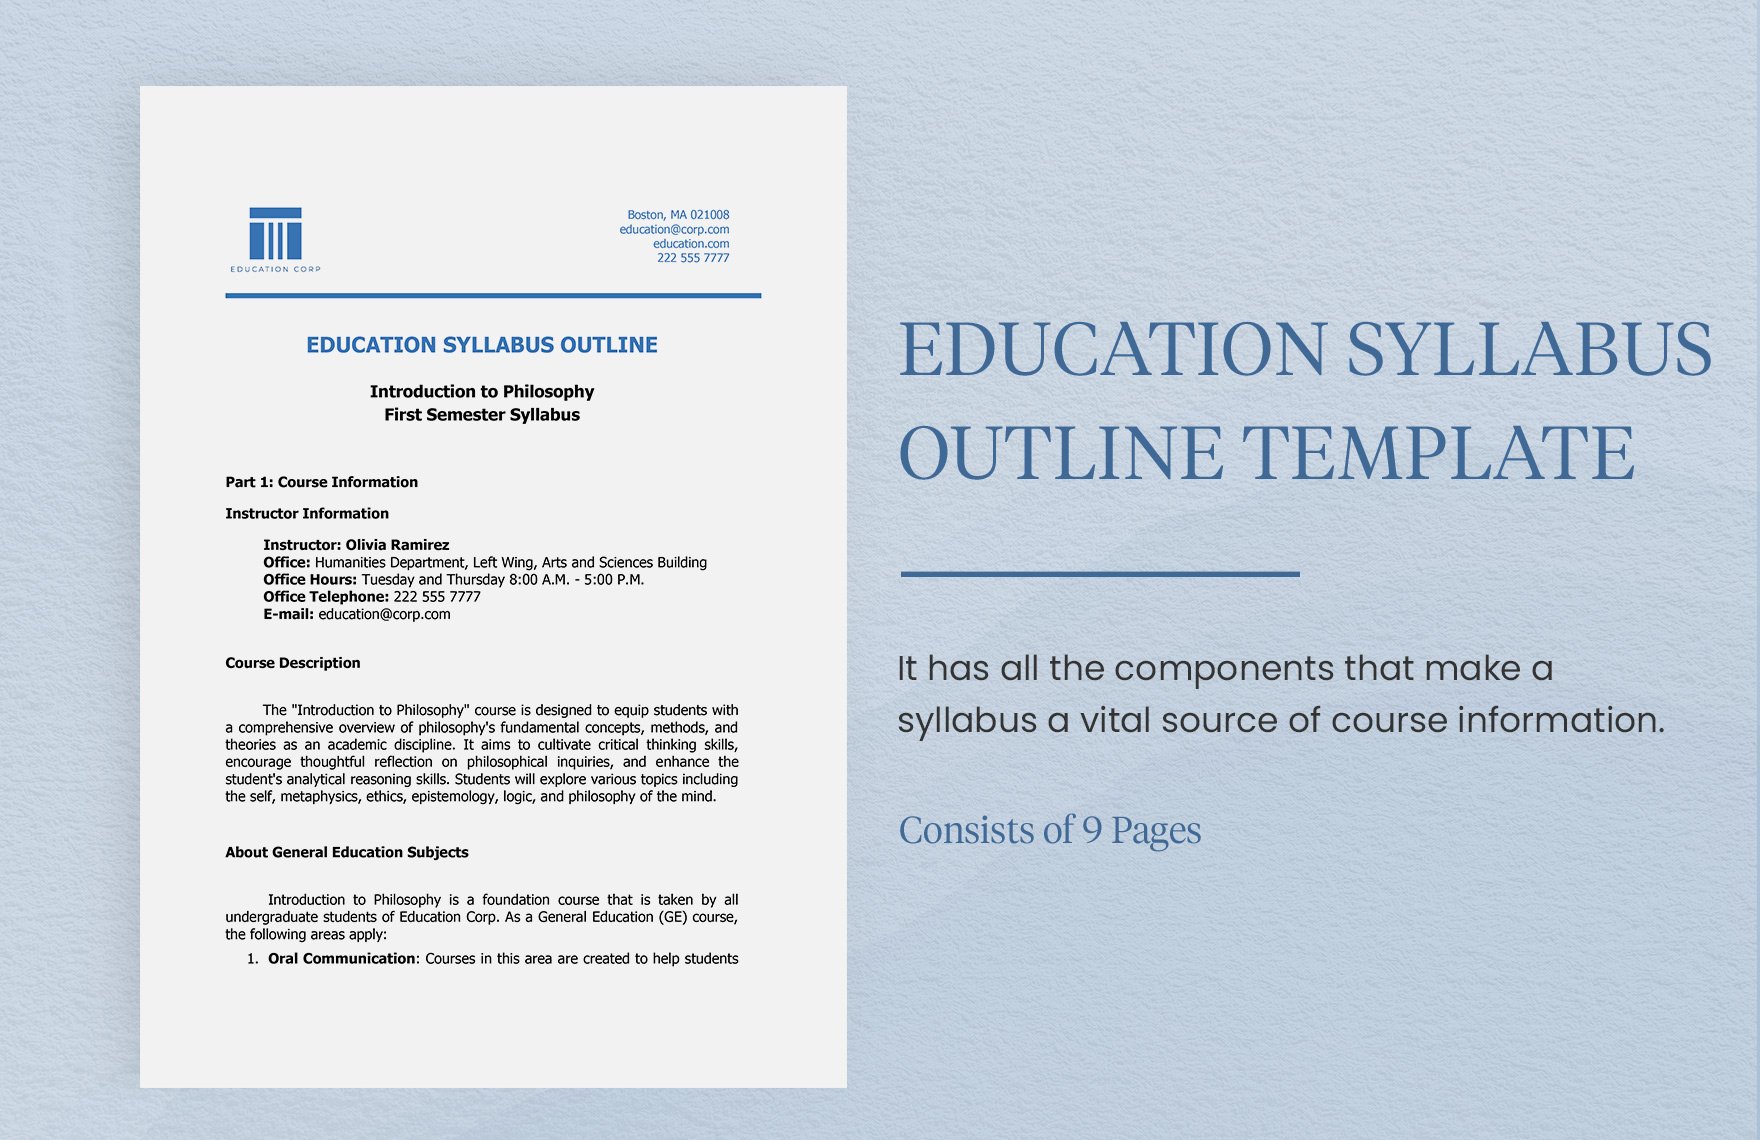 Education Syllabus Outline Template